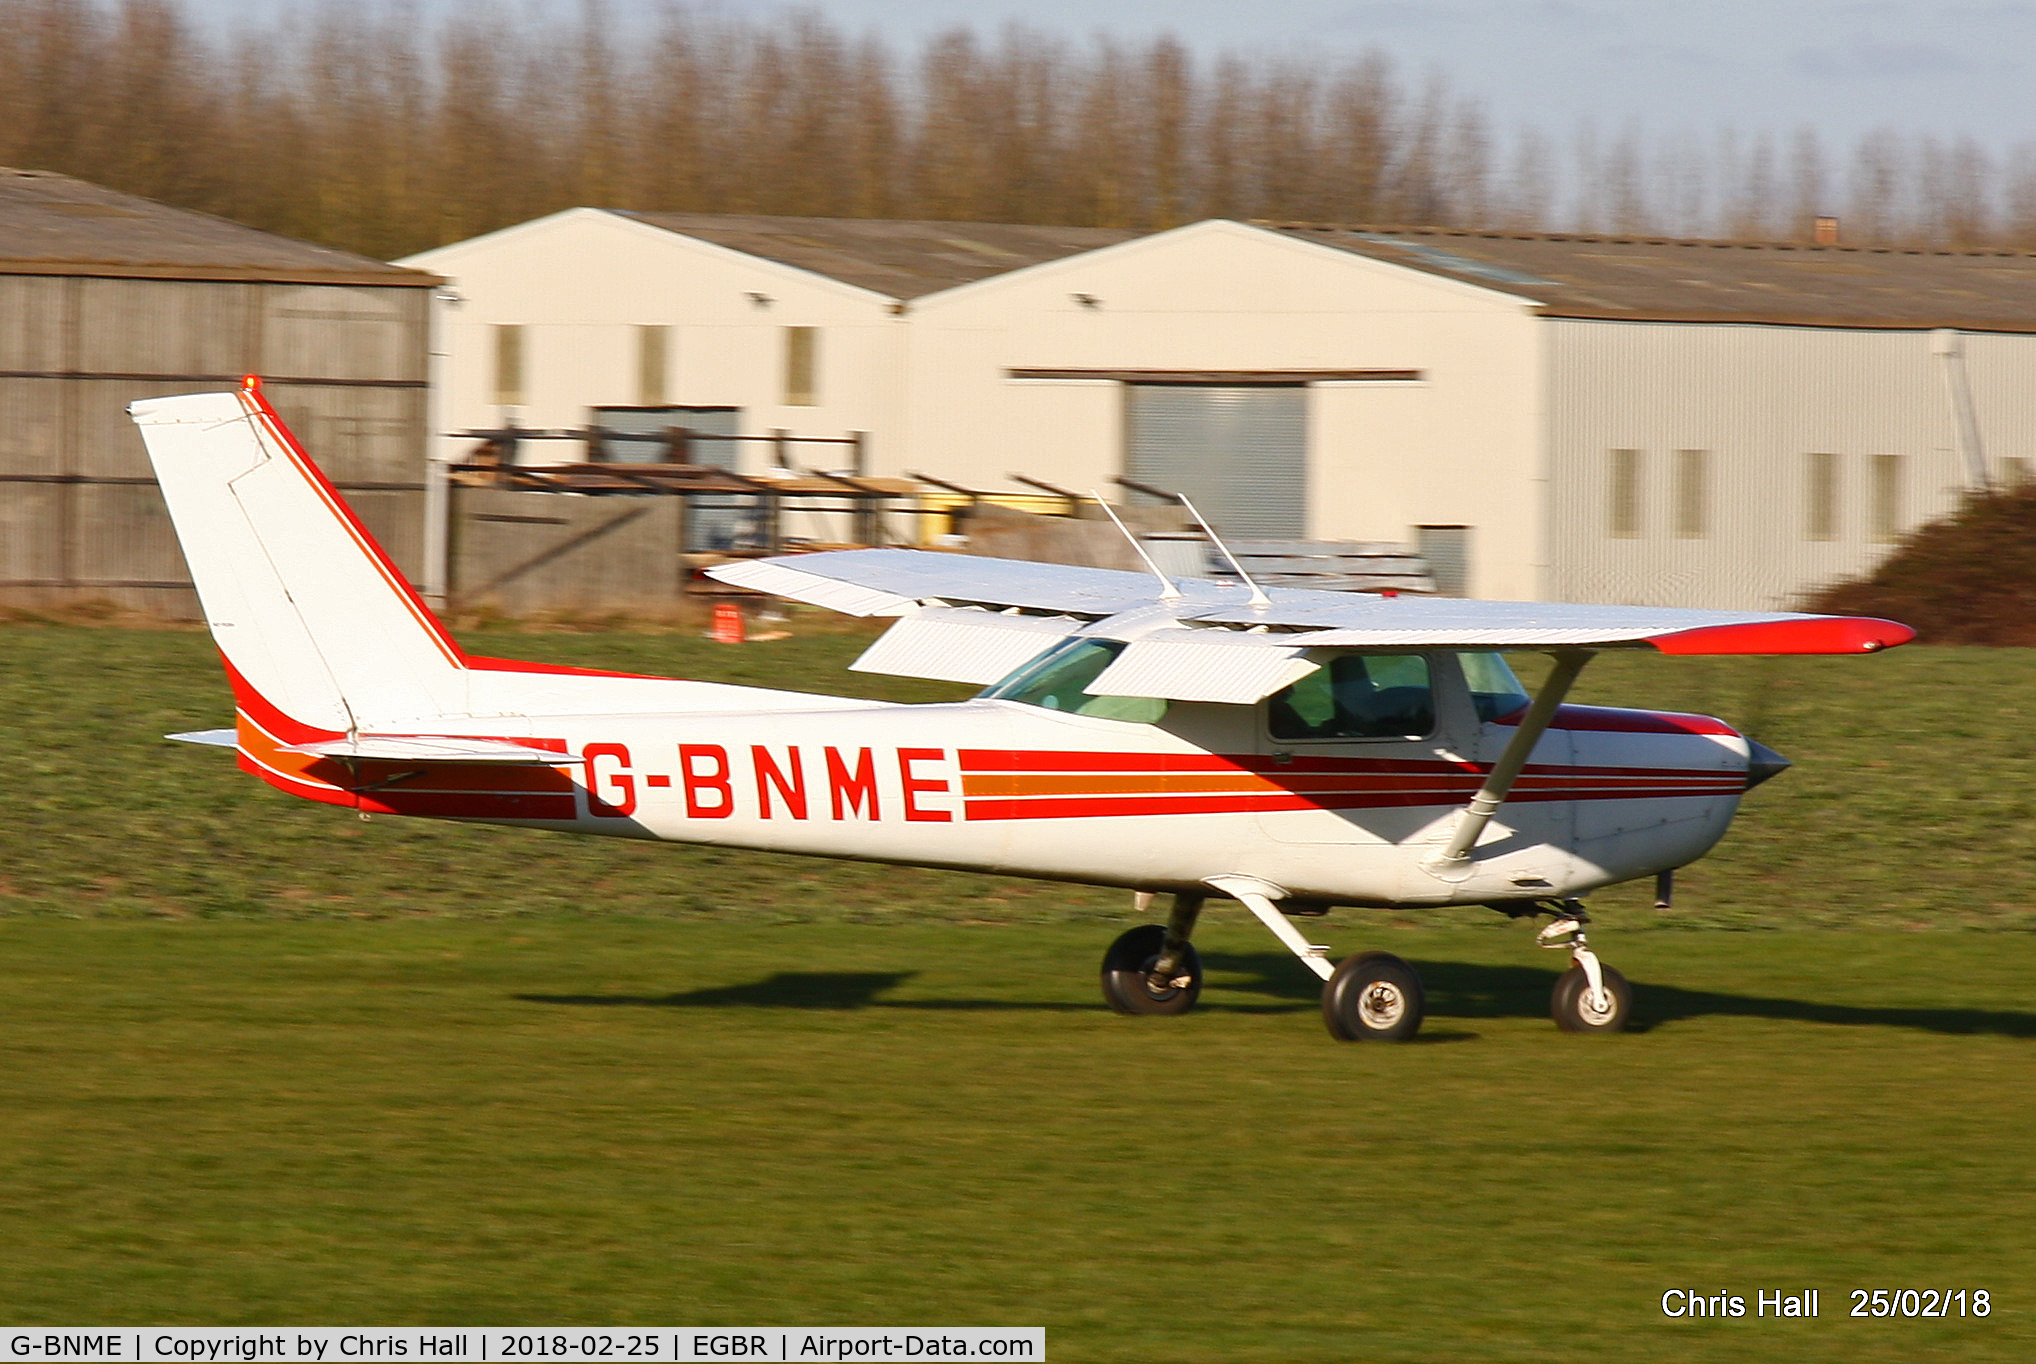 G-BNME, 1981 Cessna 152 C/N 152-84888, at Breighton